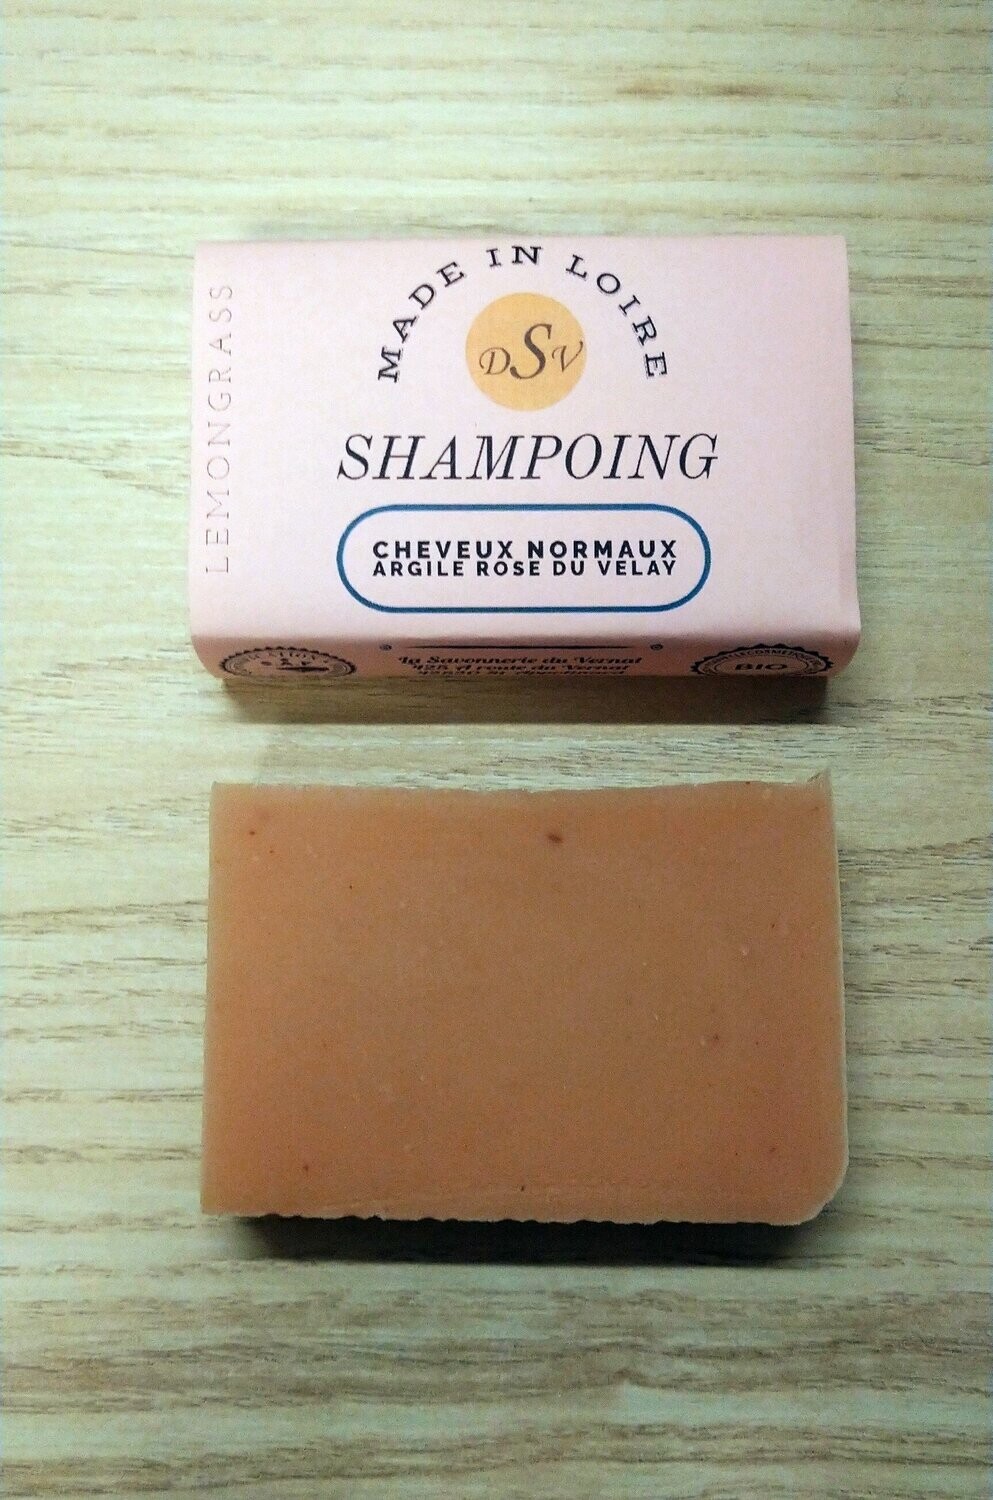 Savon shampoing solide pour cheveux normaux